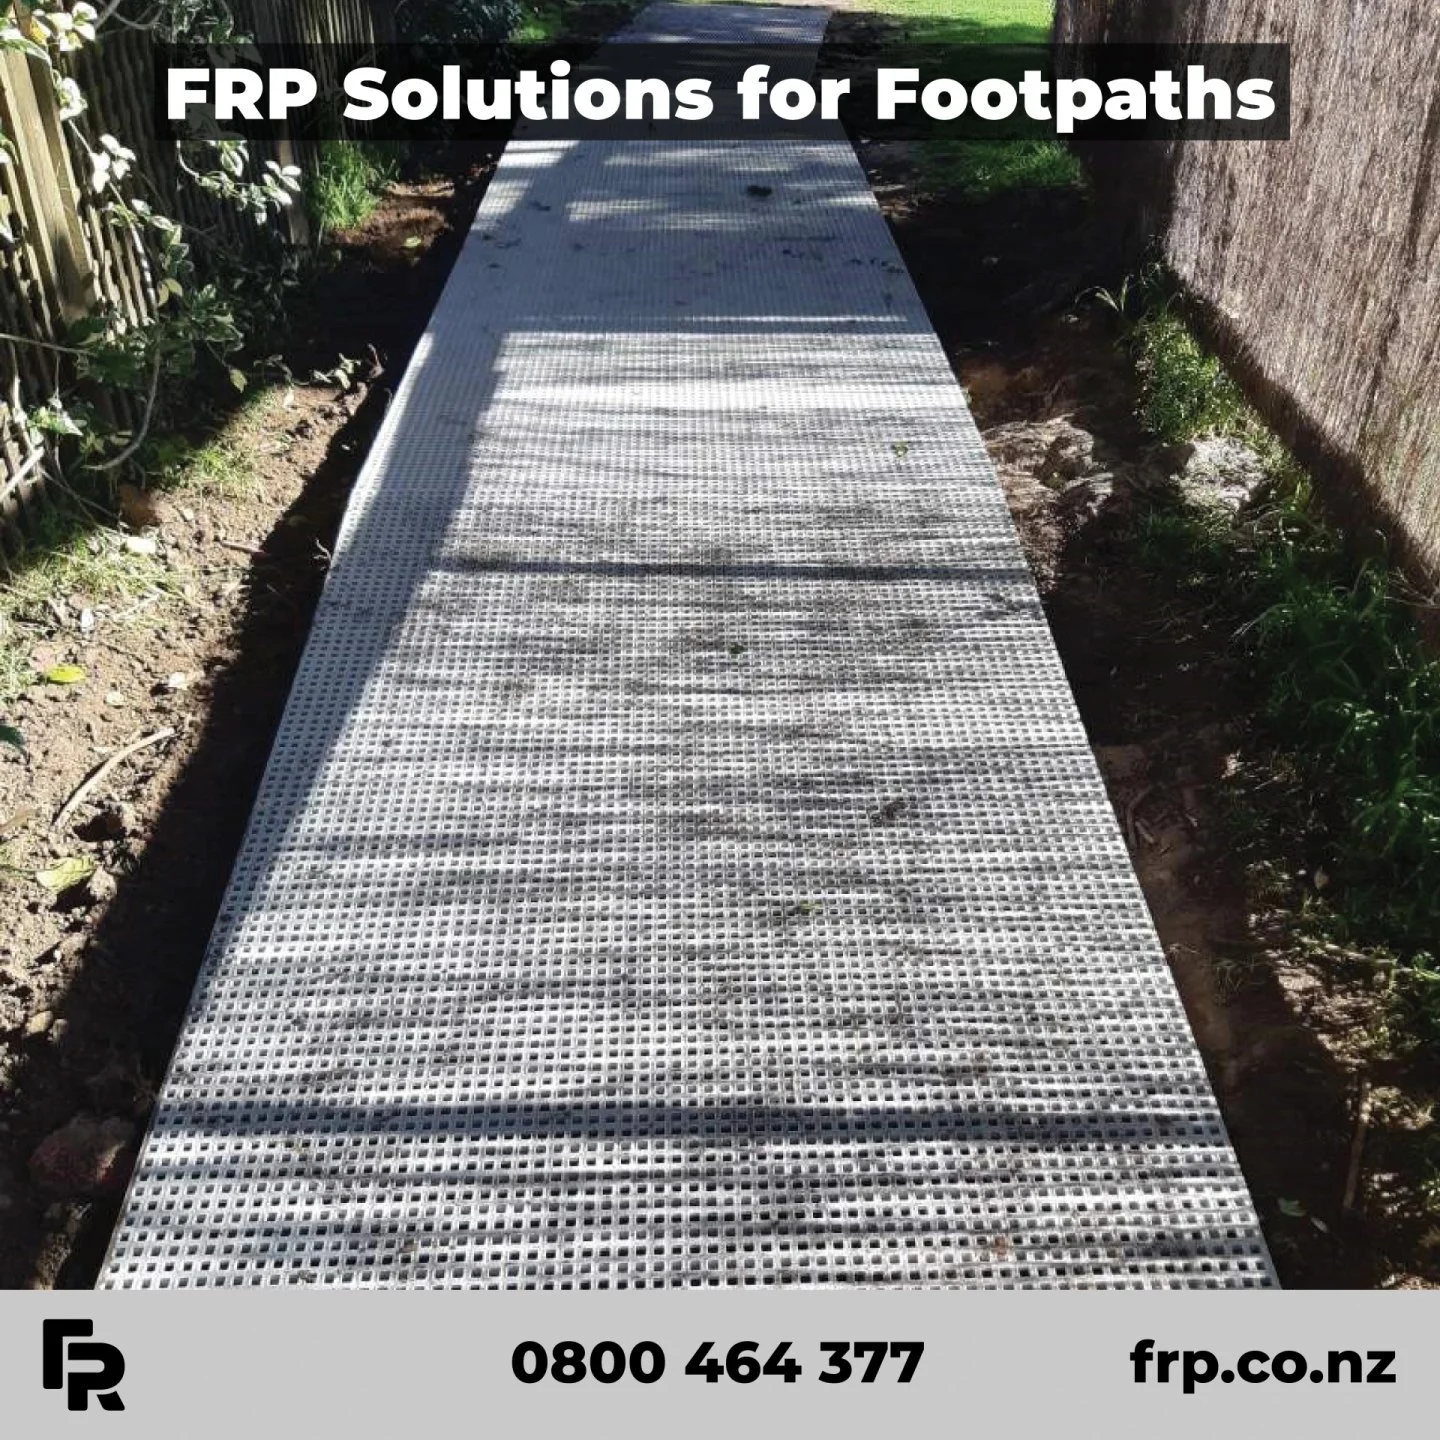 Supplying FRP grating for a wide range of footpaths and public access areas.

#frp #frpgrating #footpaths #walkways #accessareas #municipal #councils #nzarchitects #nzconstruction #commercial